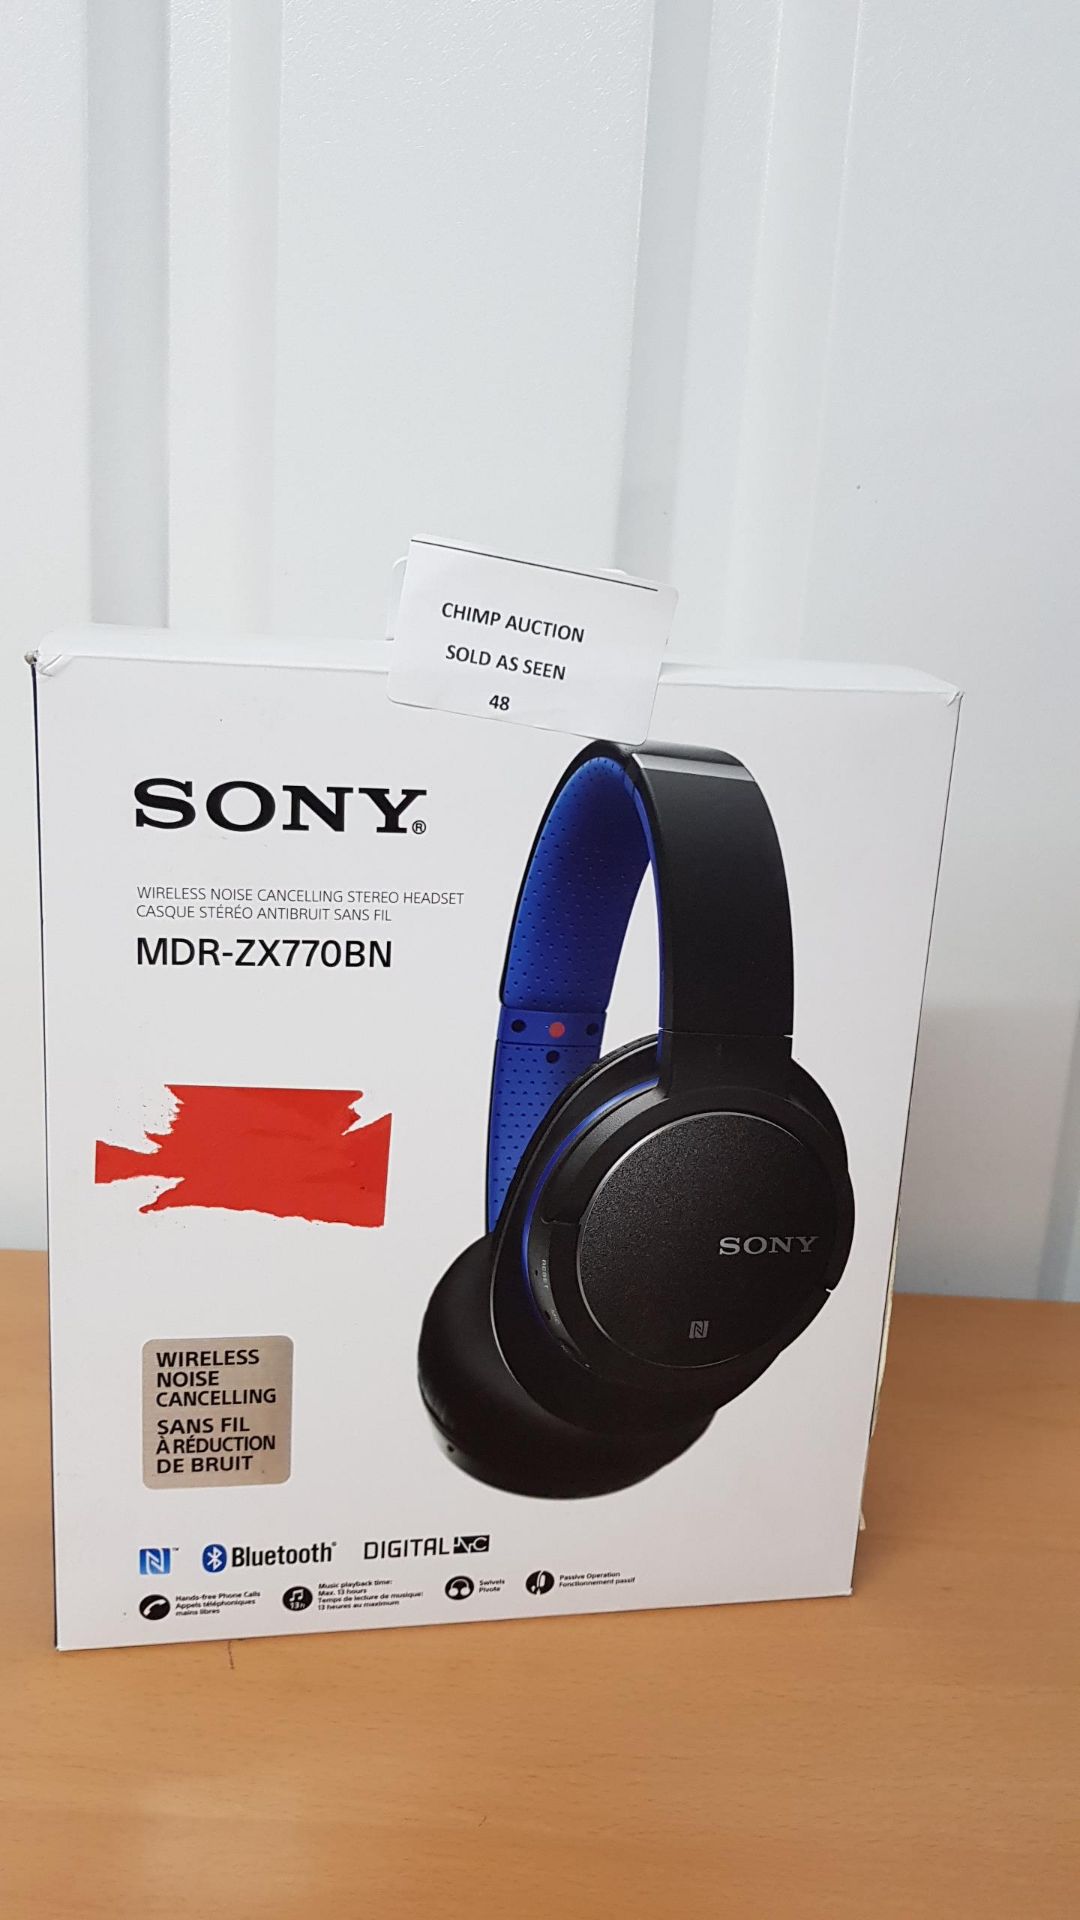 Sony MDR-ZX770BN Wireless and Noise Cancelling Headphones RRP £149.99